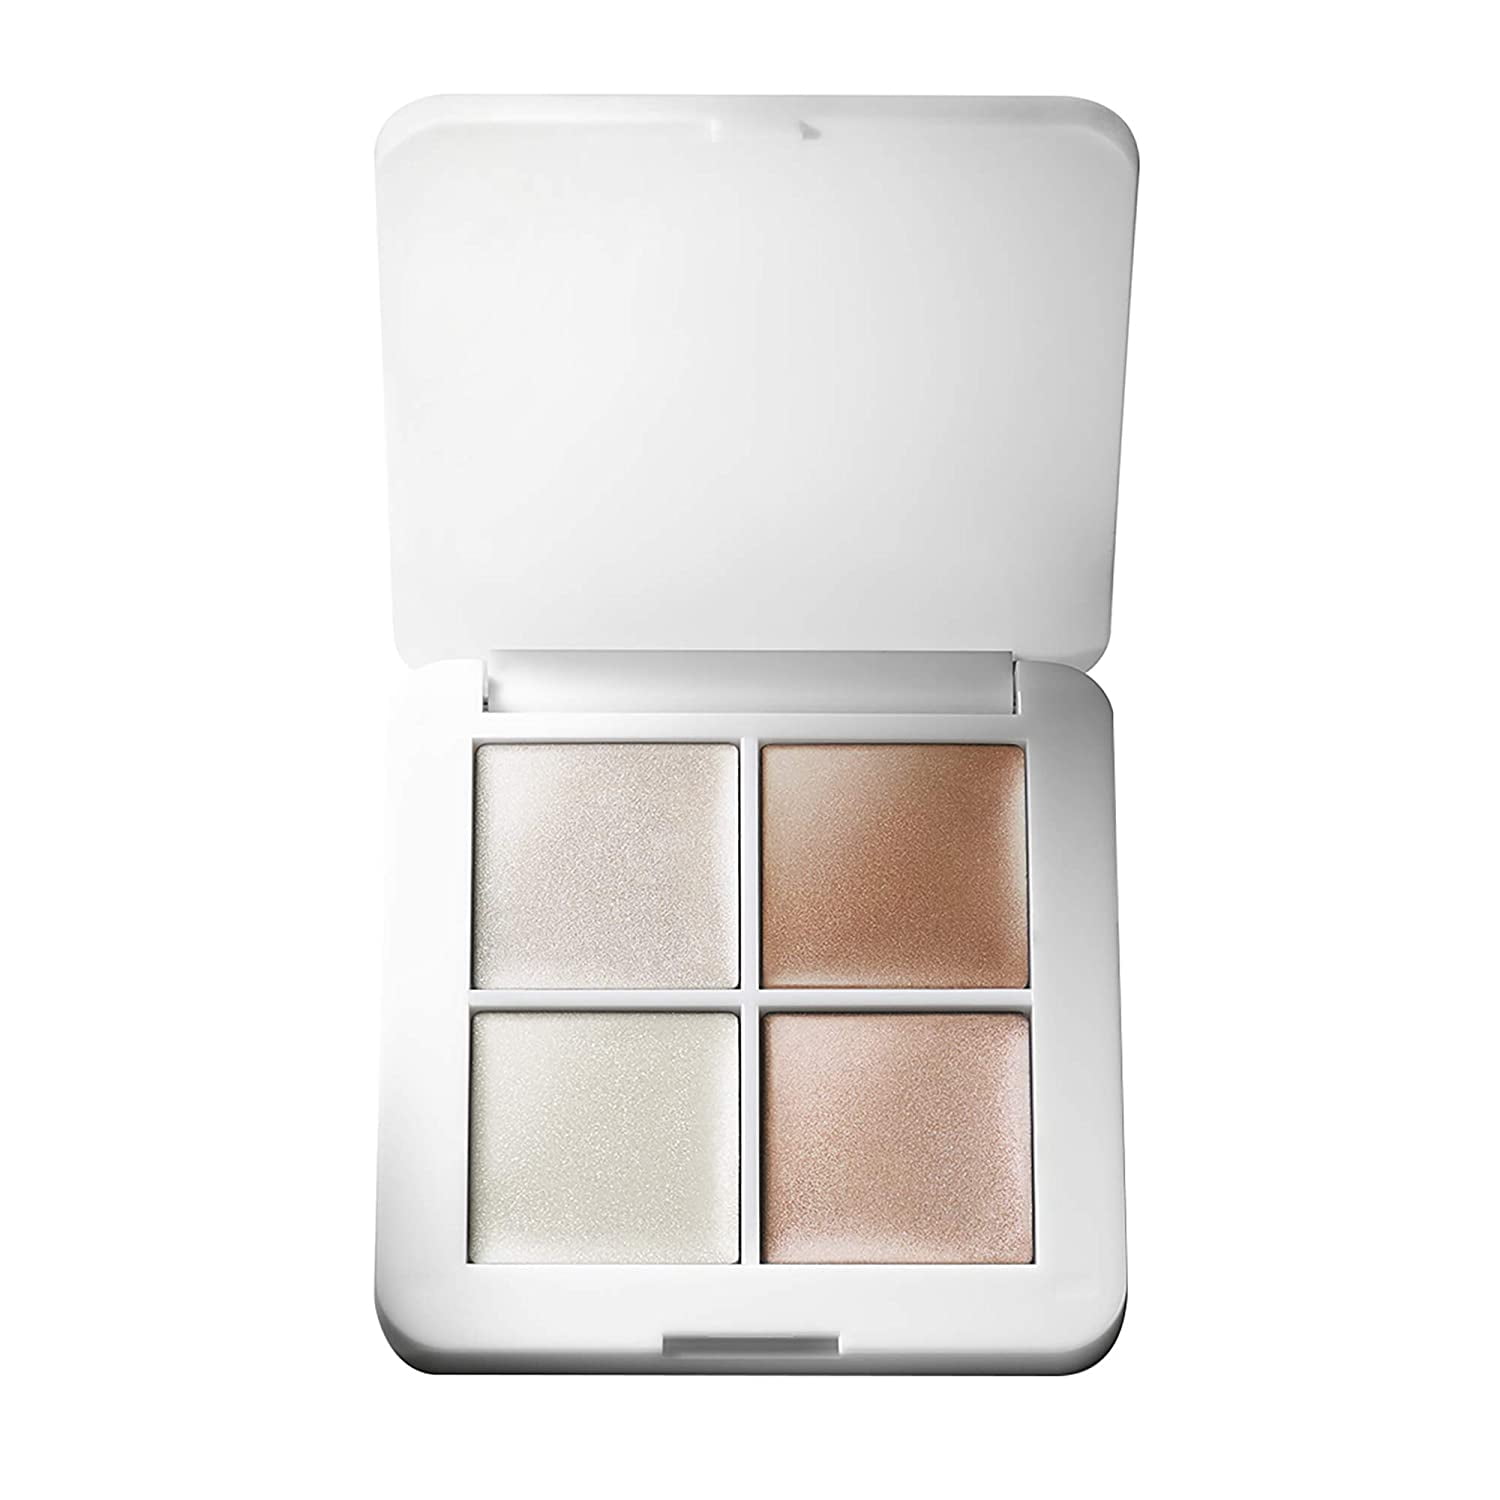 Beauty Luminizer X Quad Highlighter - Creamy Light-Reflective Organic 4 Shade Face Makeup Palette for Dewy, Glowing & Nourished Skin - Luminizer X, Luminizer Nude, Champagne Rosé & Champagne Fizz - Walmart.com